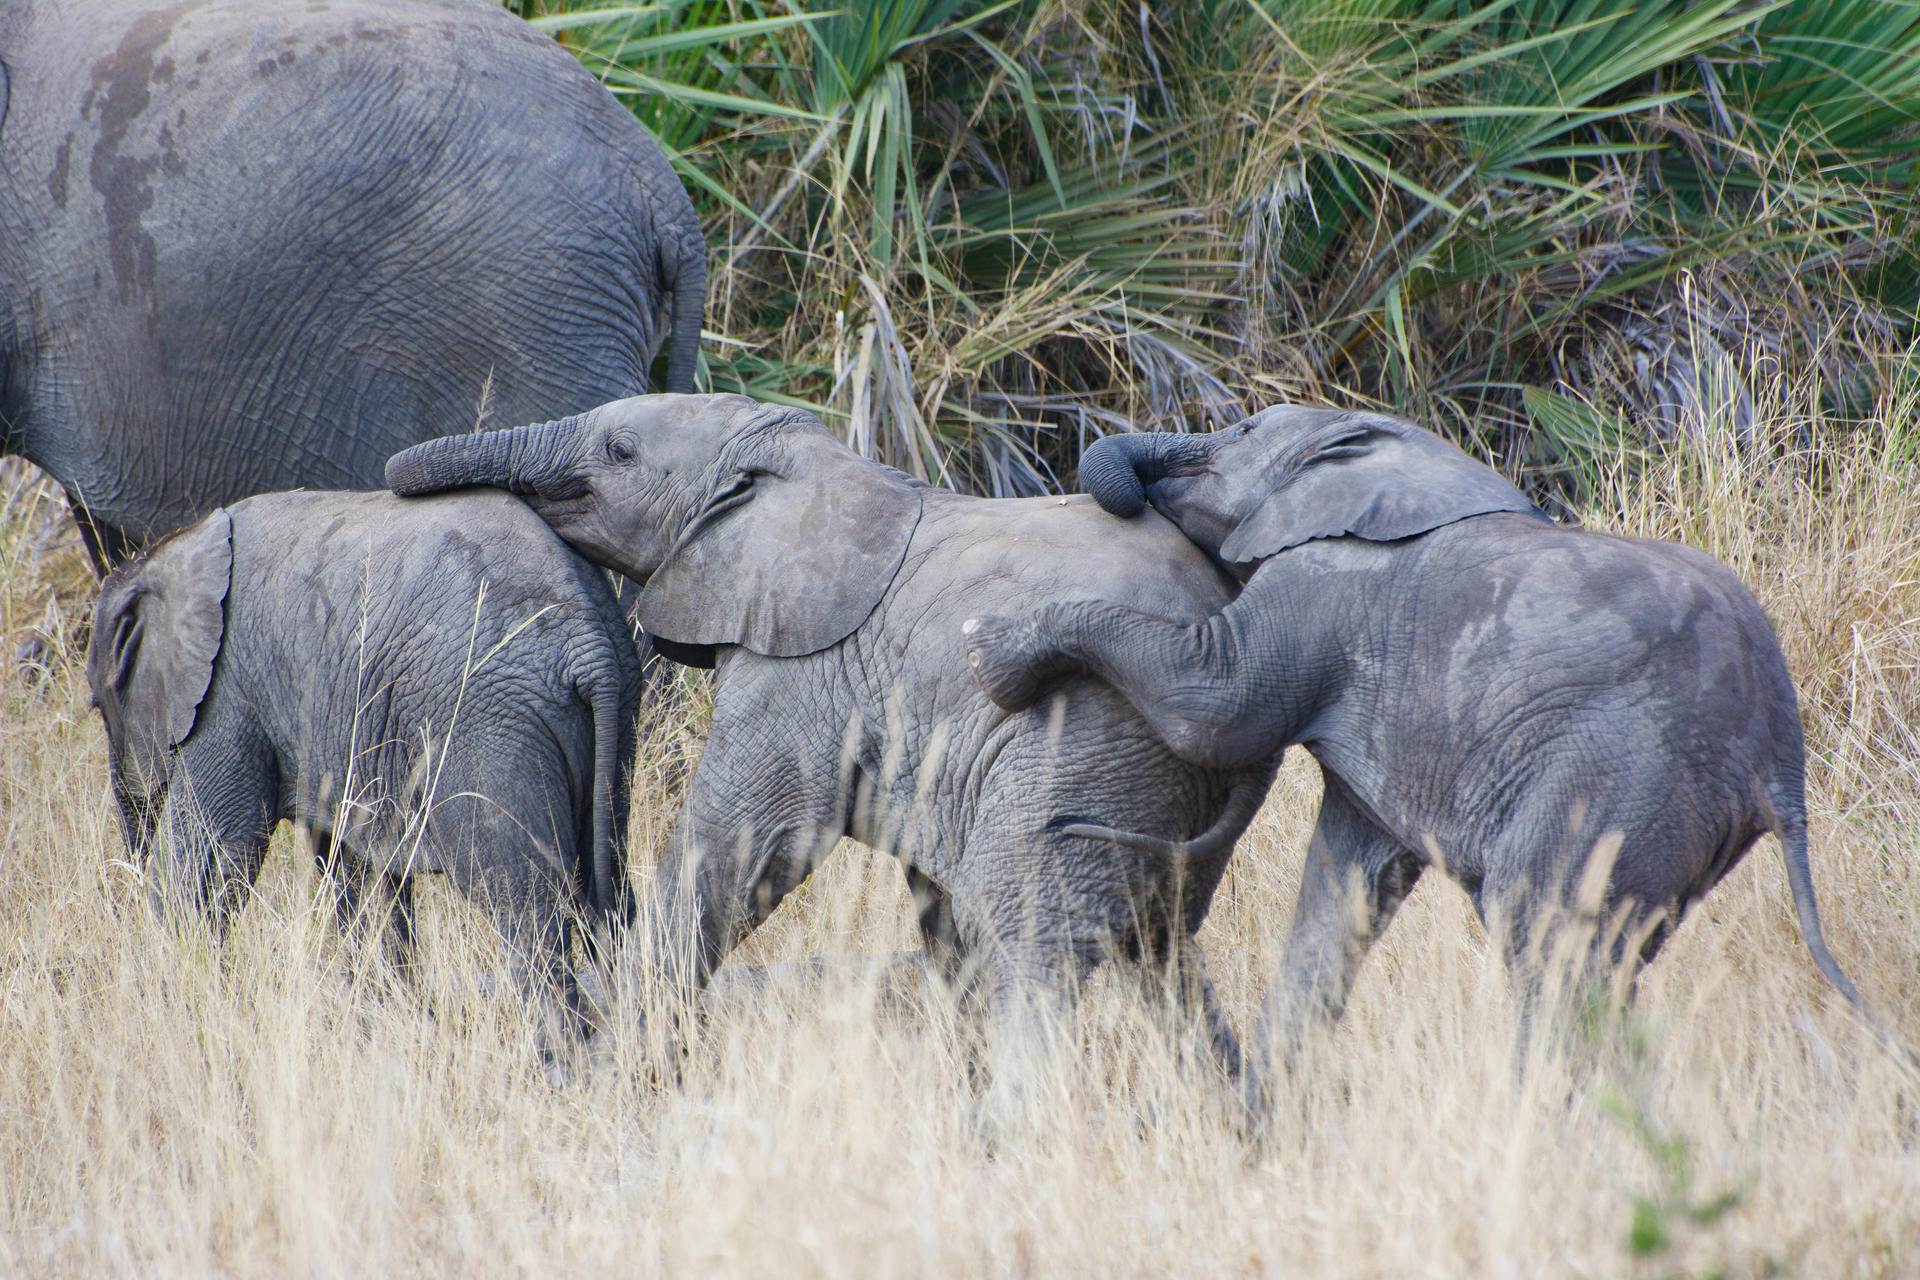 Three elephant calfs walking in a line, connected by their trunks.